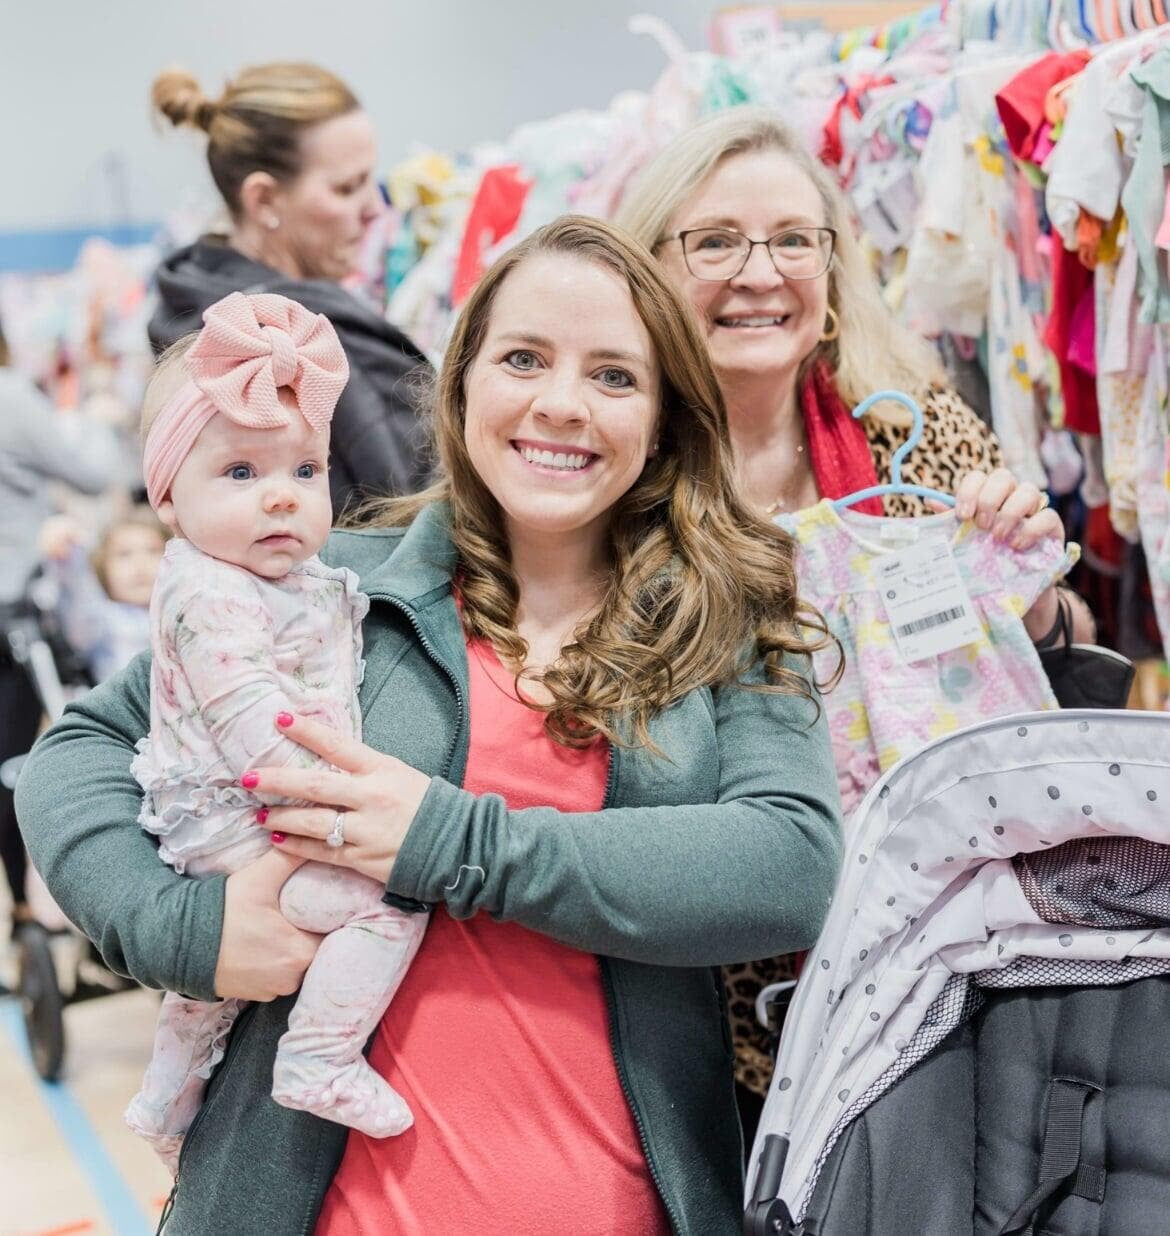 Mom holds hand up to show of rows and rows of clothing for sale at 50 to 90% off retail prices!